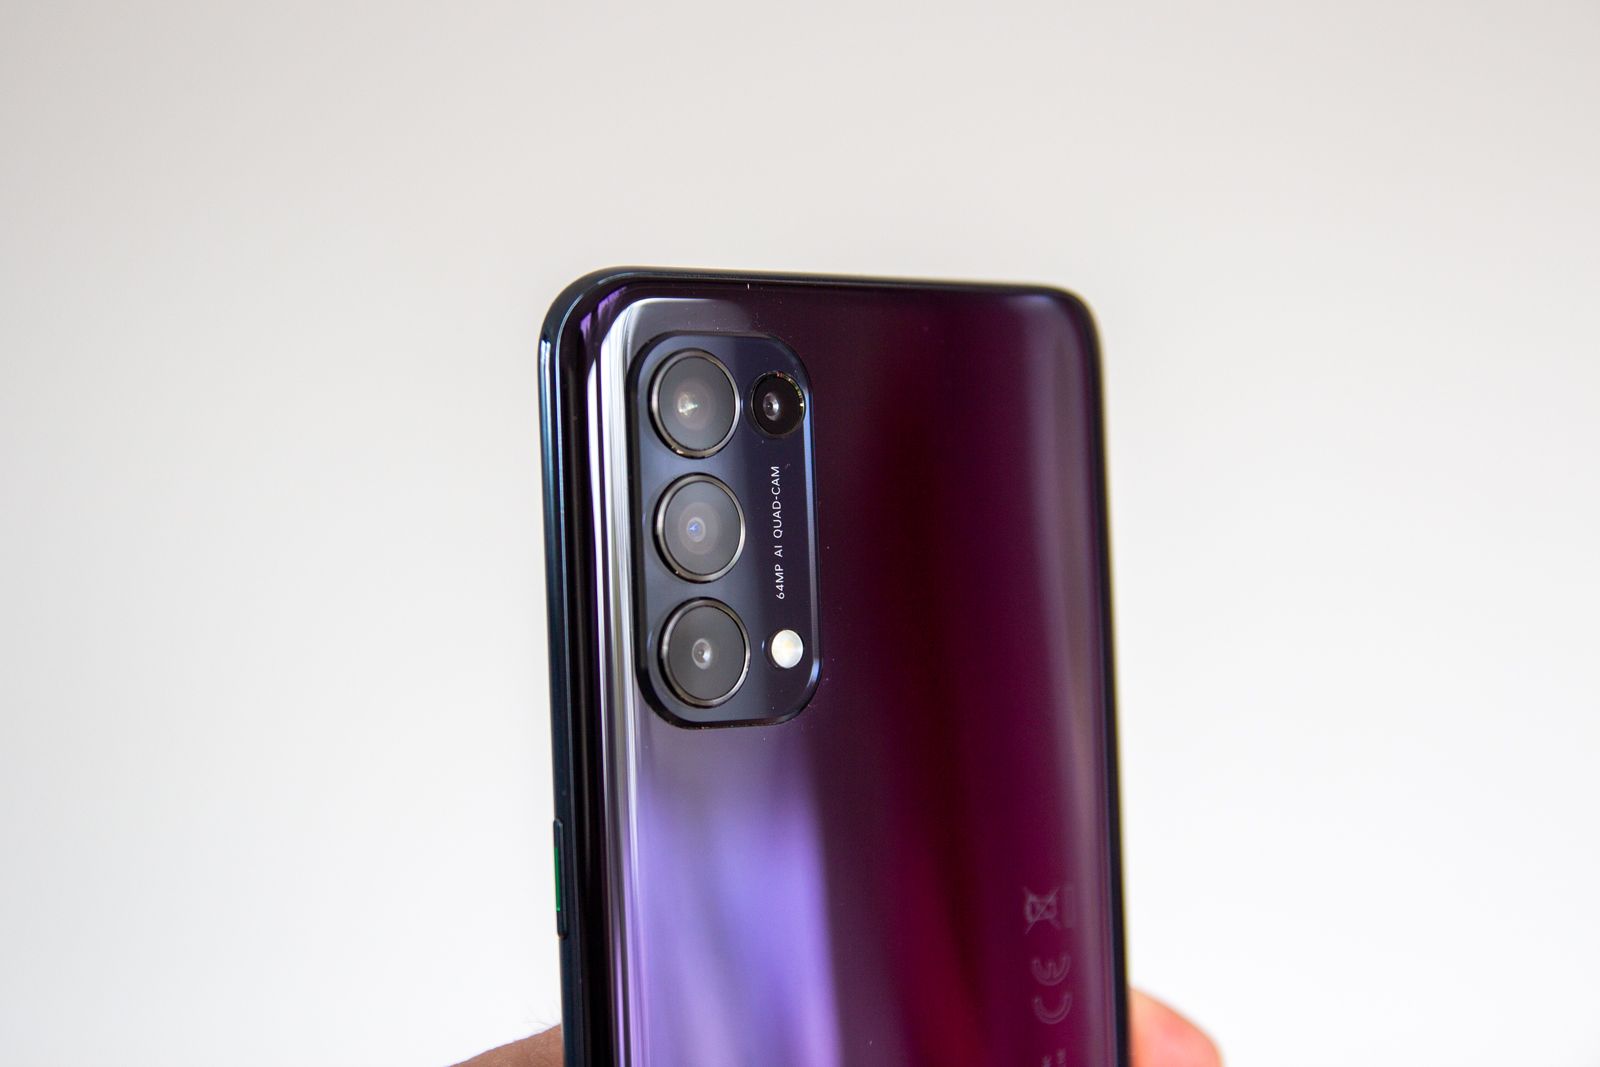 Oppo Find X3 Lite Review